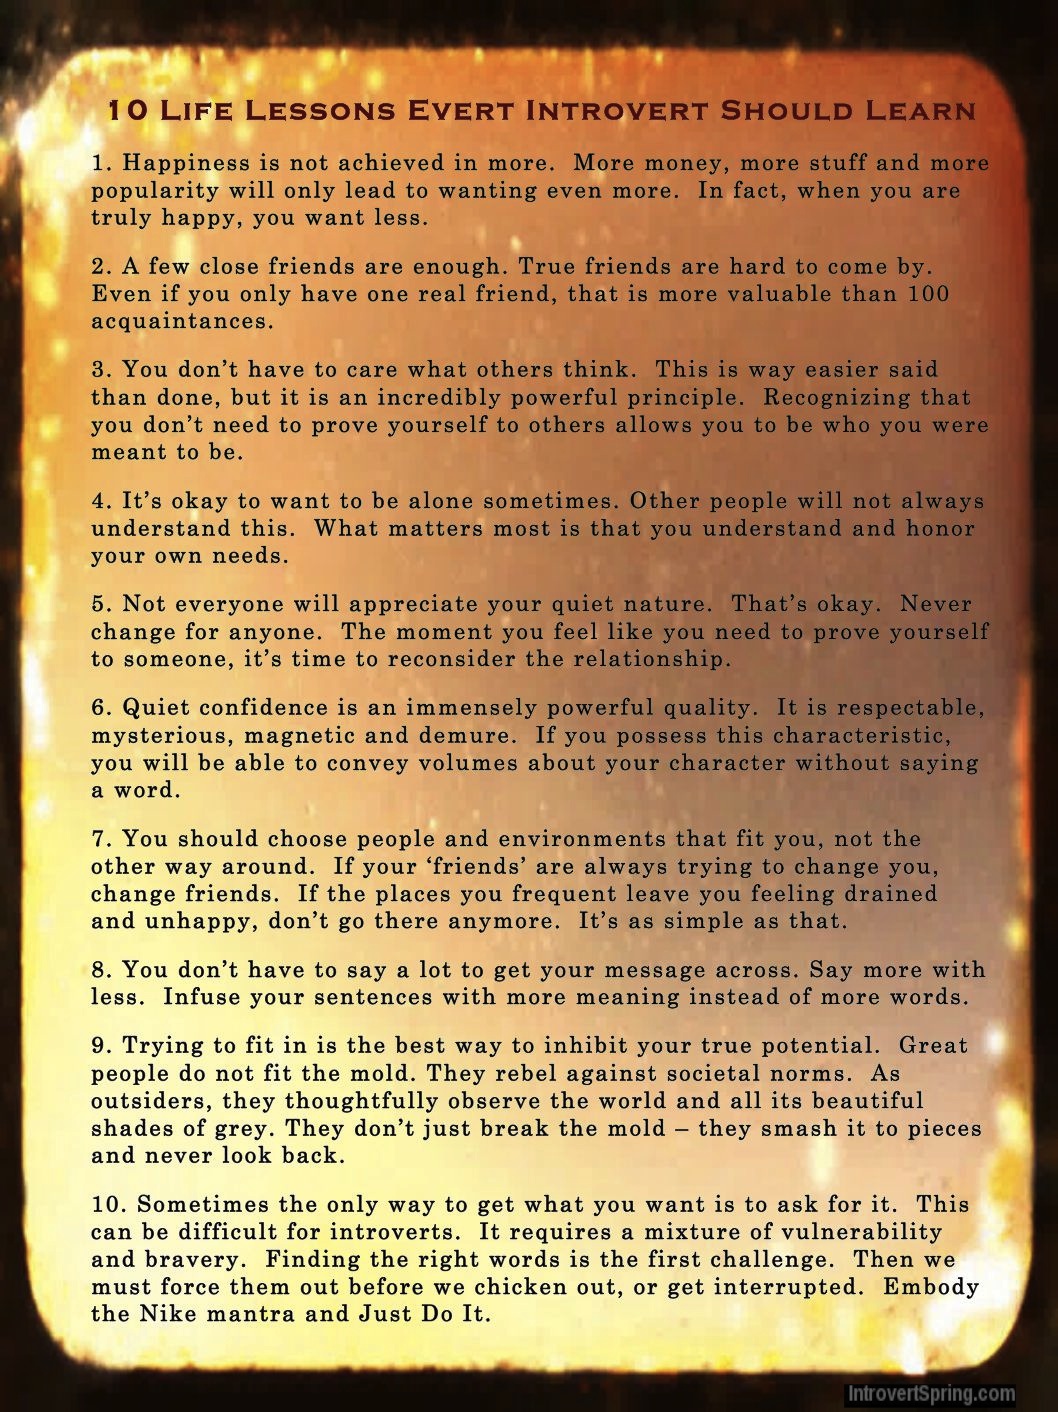 10 Life Lessons Every Introvert Should Learn (Poster)